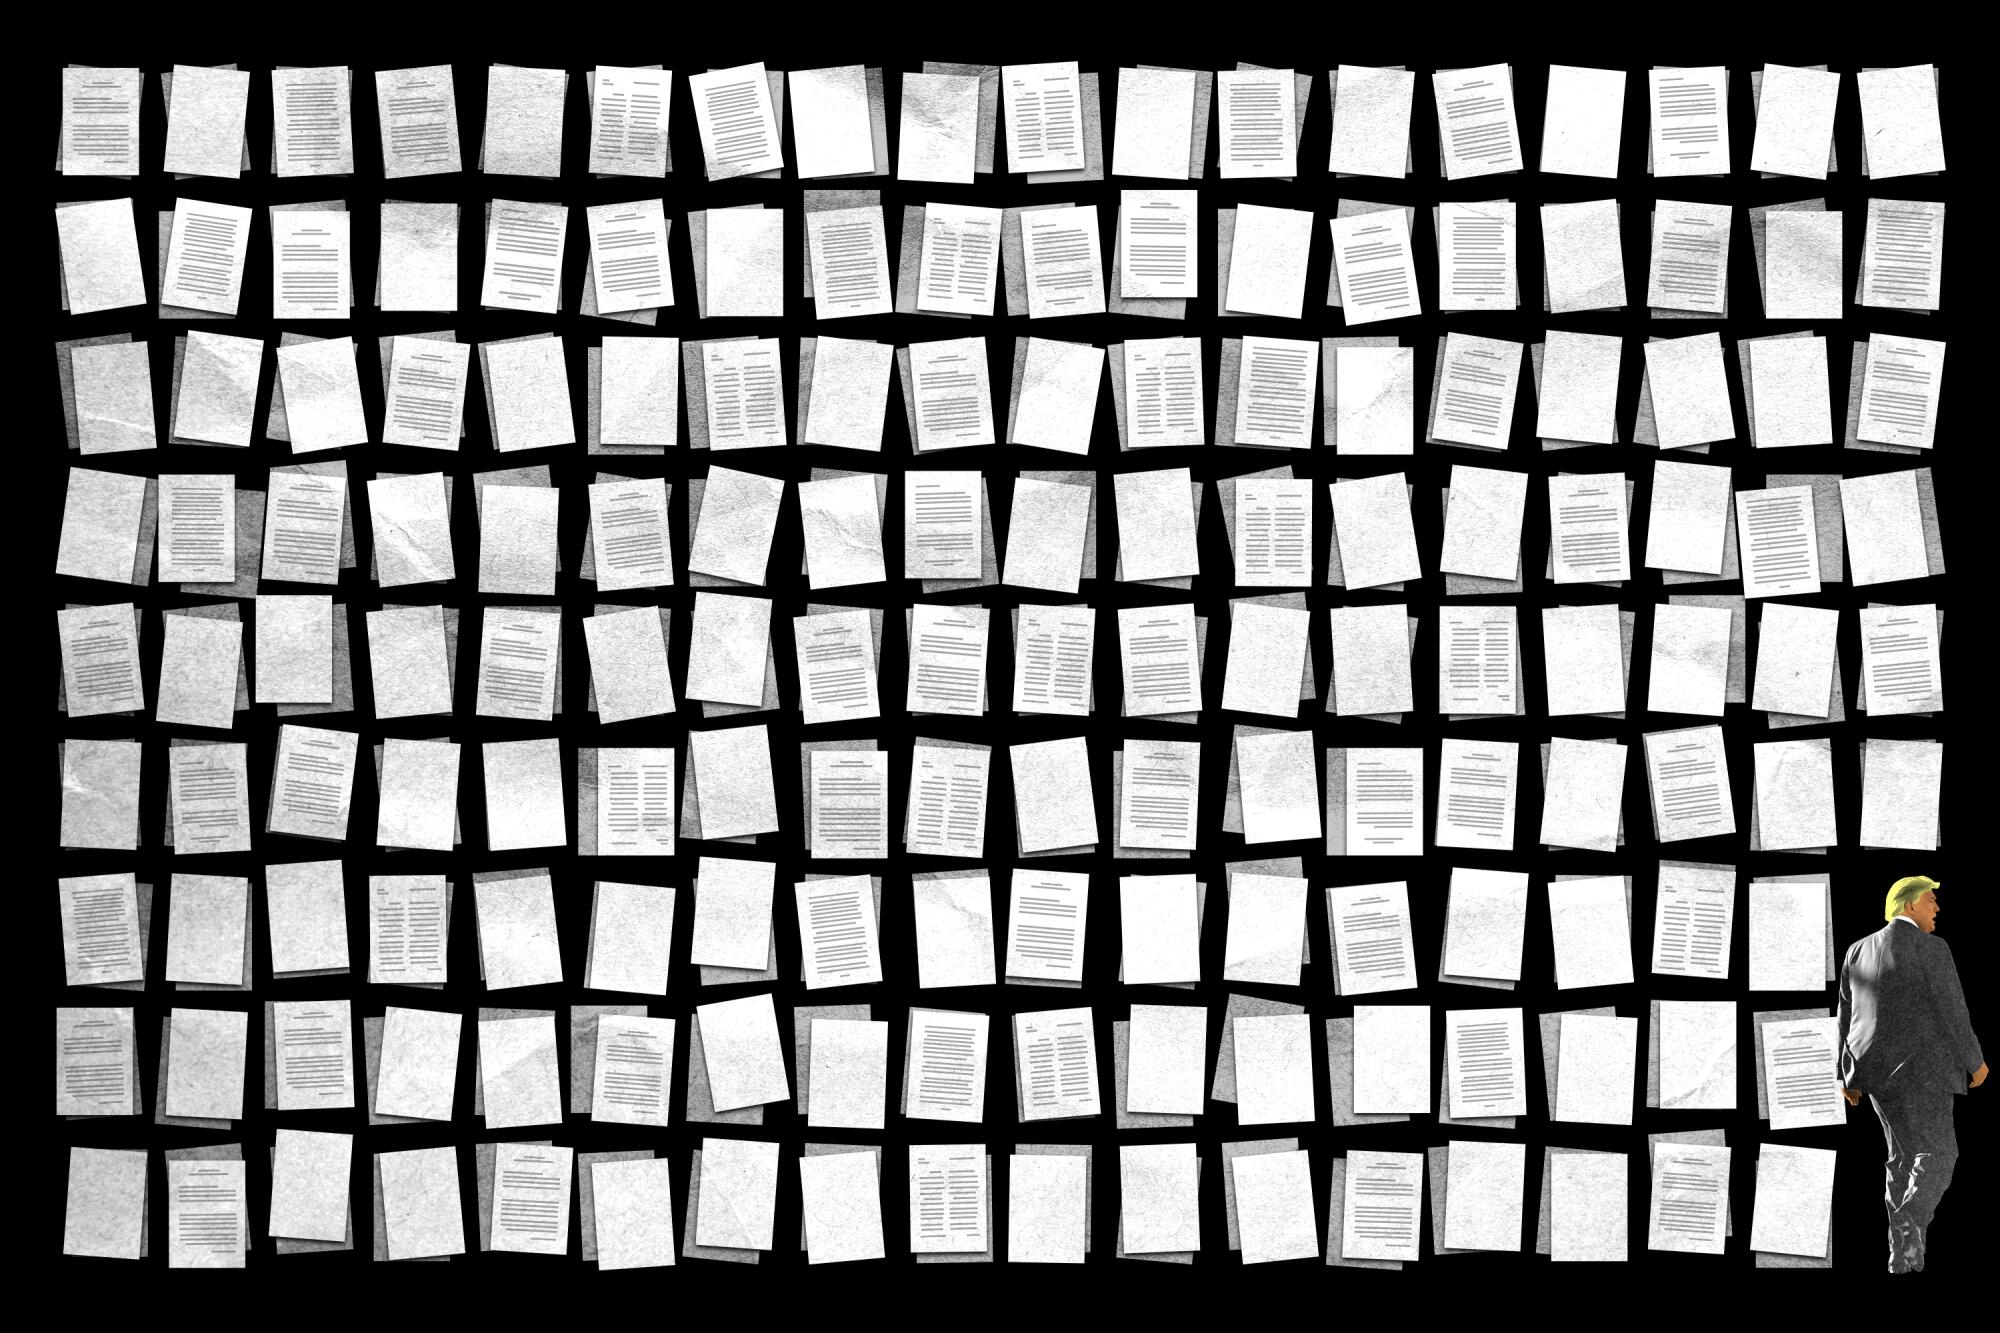 A photo illustration of hundreds of documents stacked in rows with a small figure of Donald Trump in the bottom right corner.